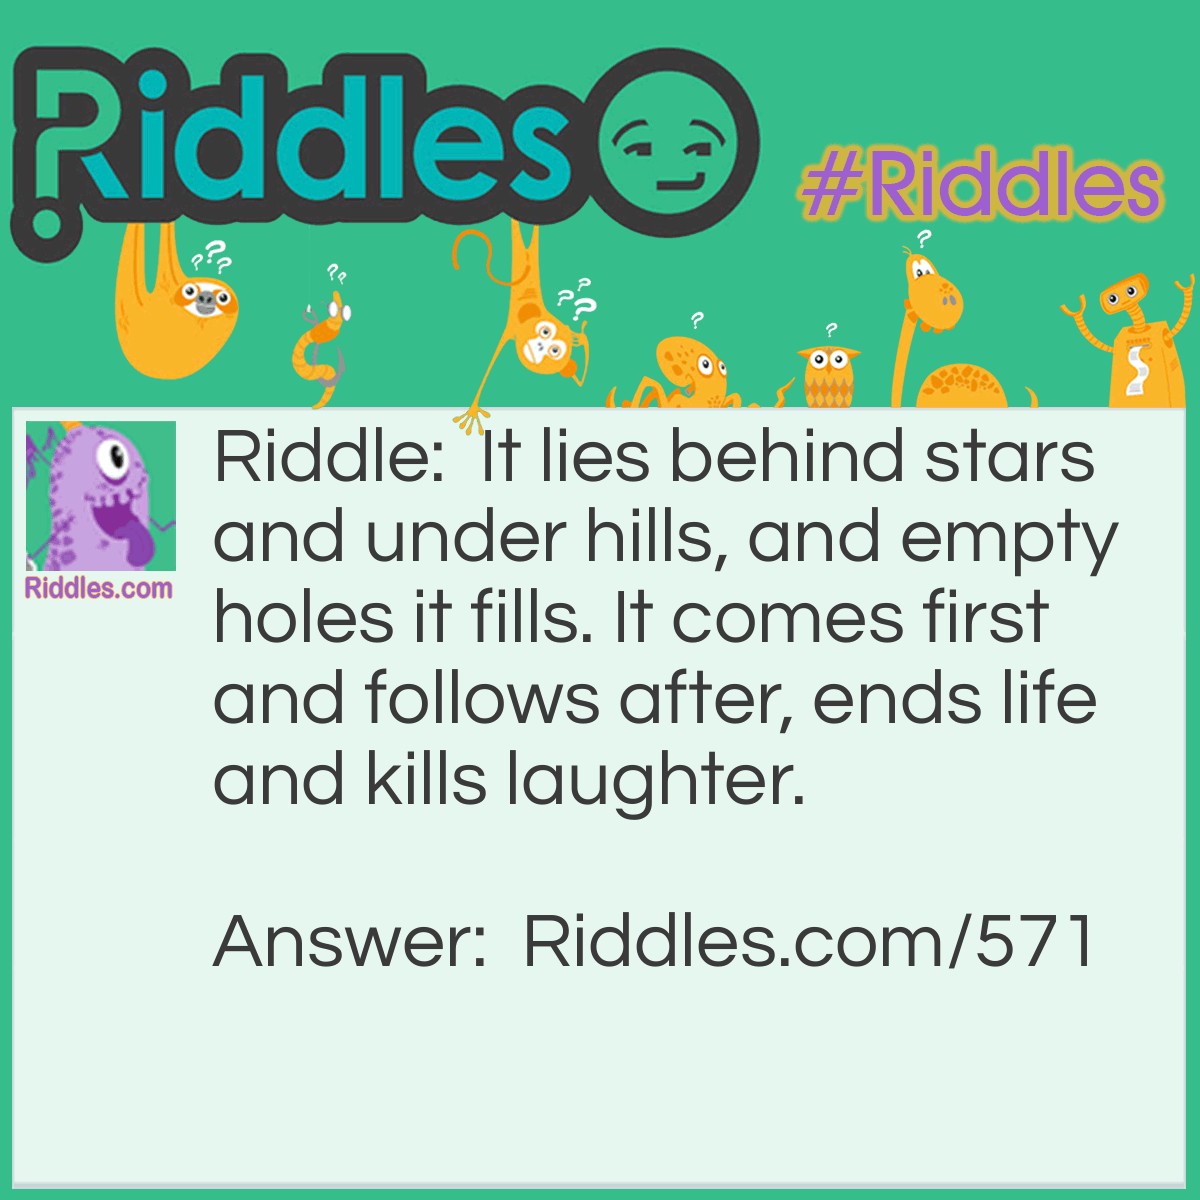 Riddle: It lies behind stars and under hills, And empty holes it fills. It comes first and follows after, ends life, and kills laughter. What is it? Answer: Darkness.